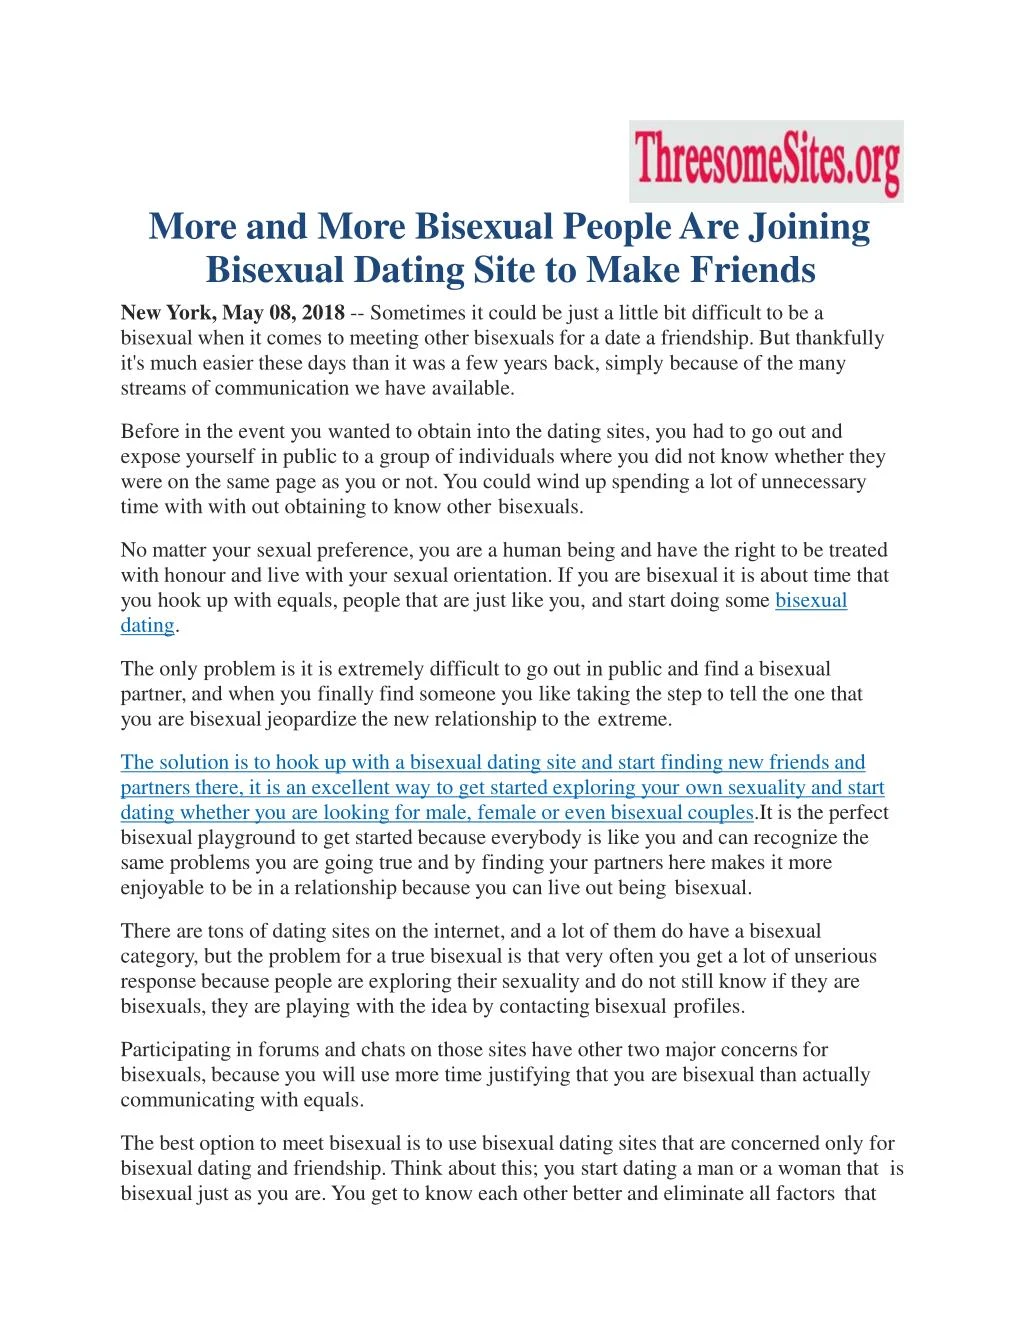 more and more bisexual people are joining